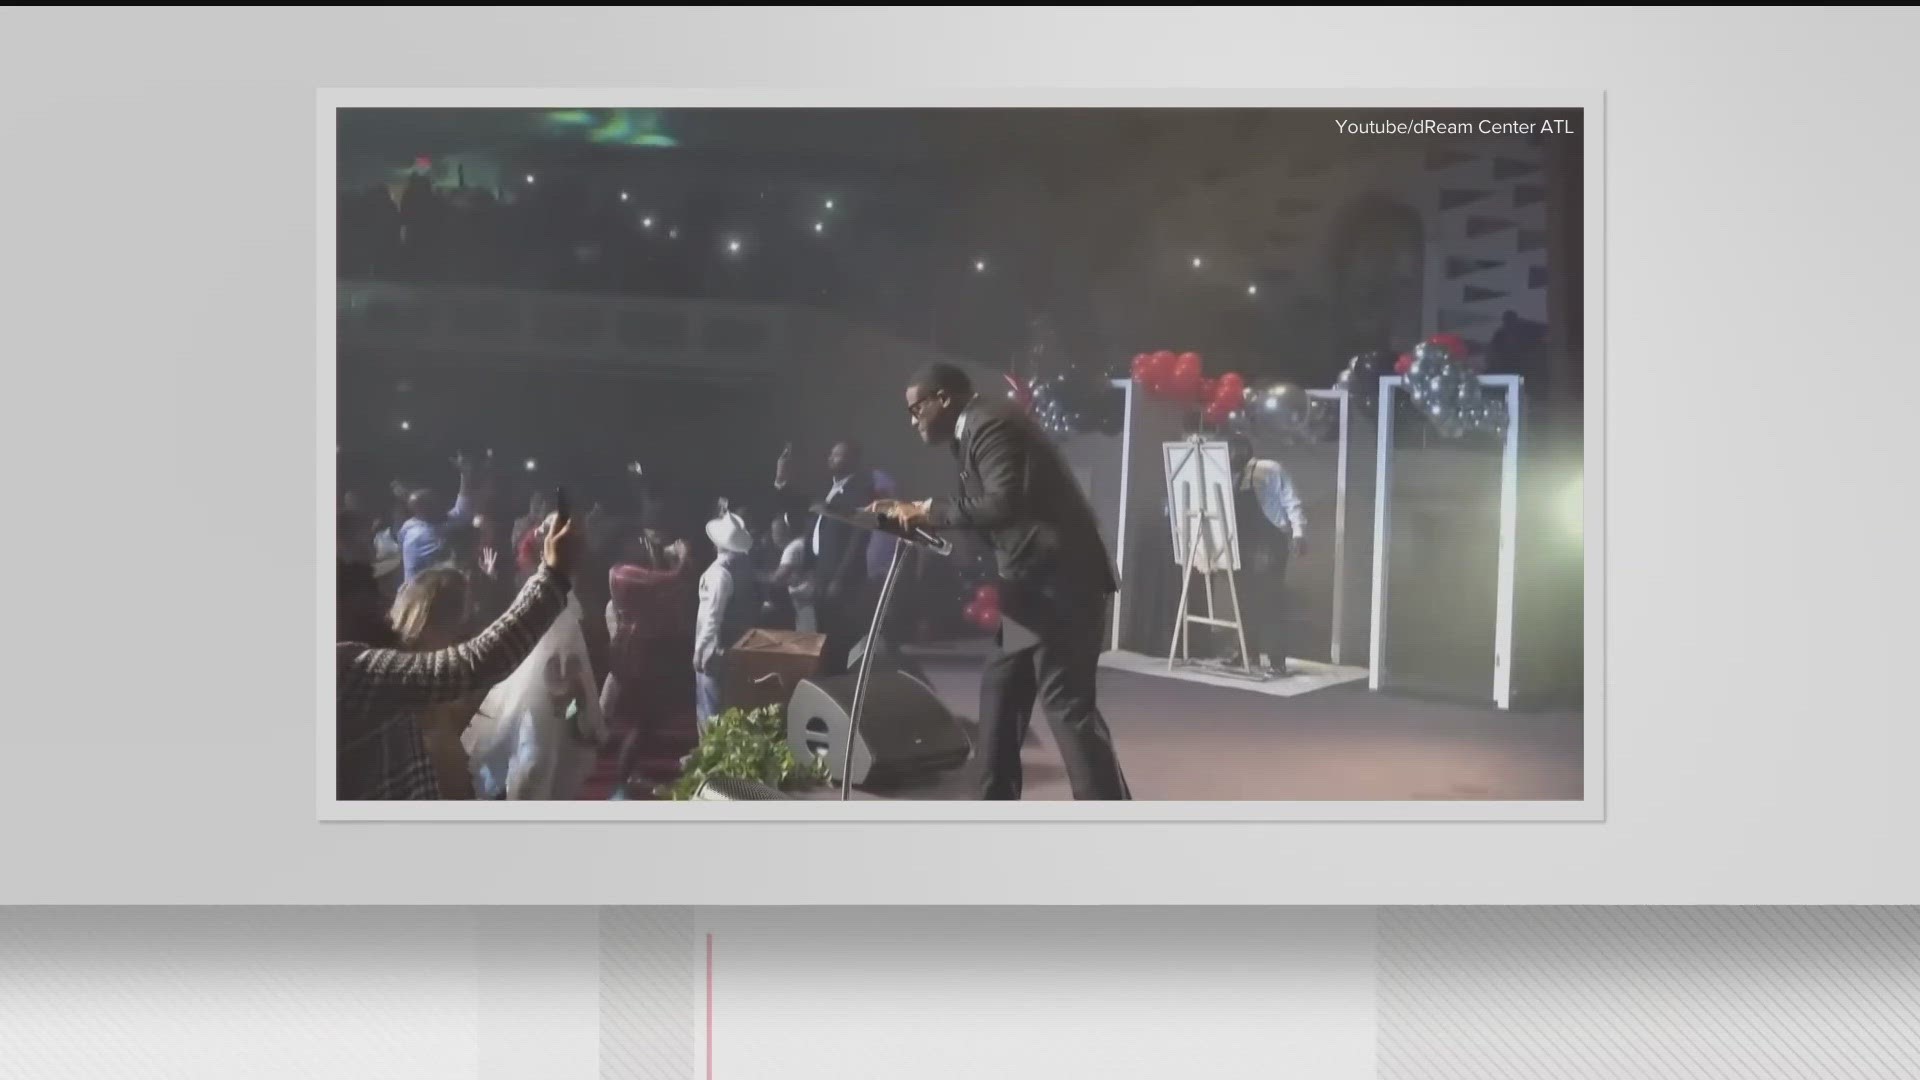 The dReam Center Church of Atlanta went viral after videos of their lively New Year's Eve service were posted online.